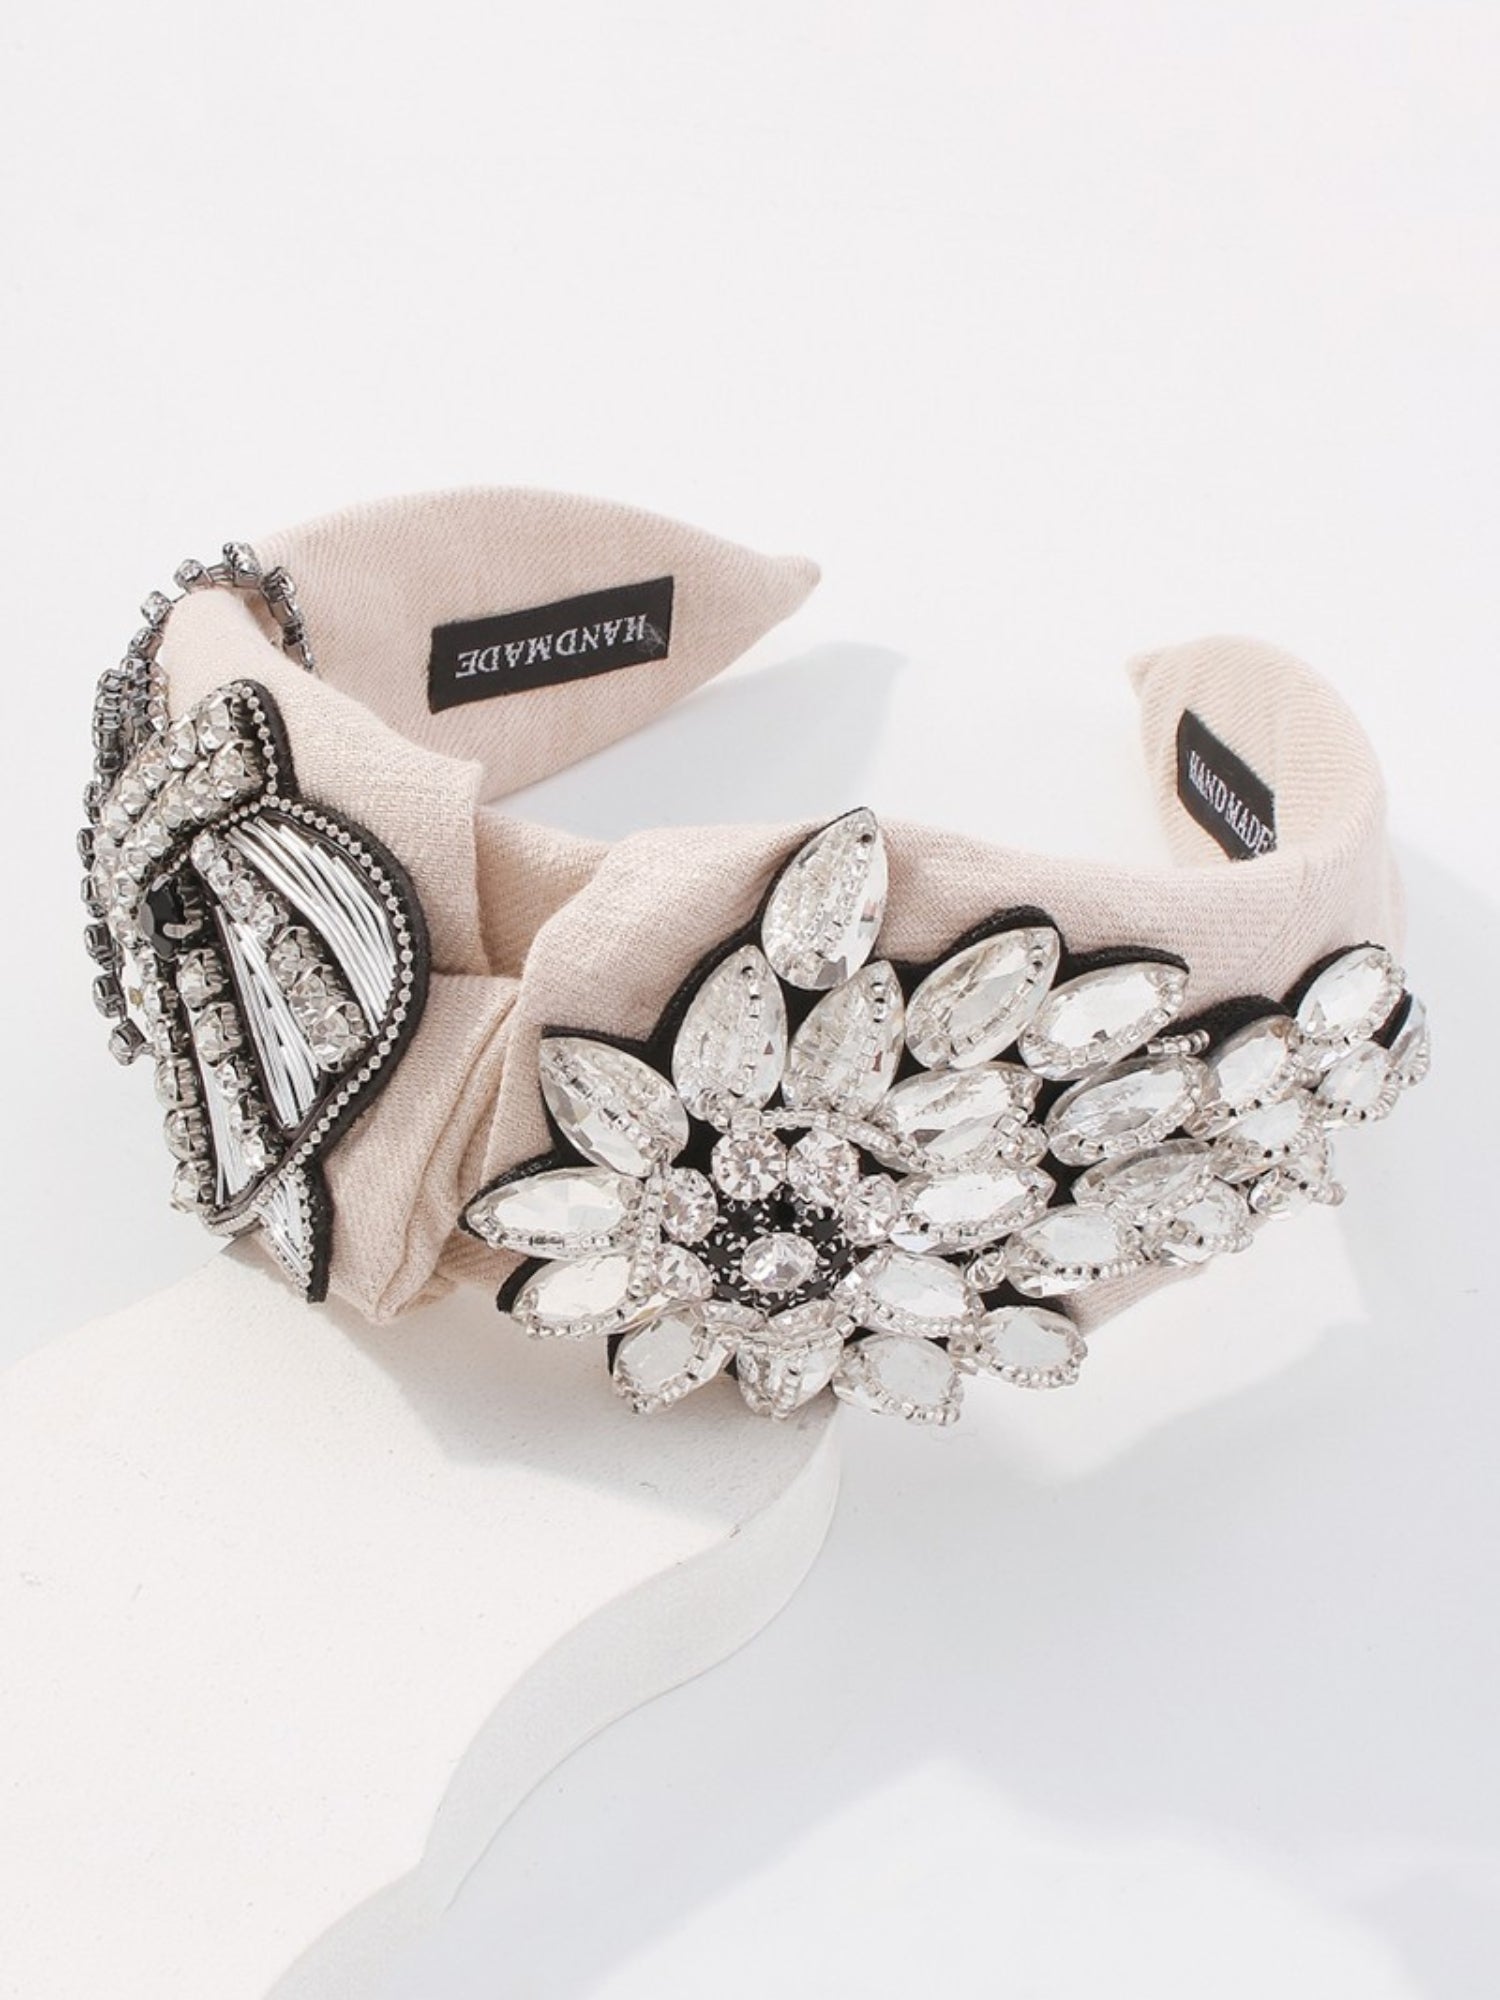 The Queenship Headband - The Queenship Headband is for all accessory collectors! This is a statement piece that has the finest handmade details. Made of a soft beige cotton, this headband has a crystal embellished crown with cascading crystal bow. On the